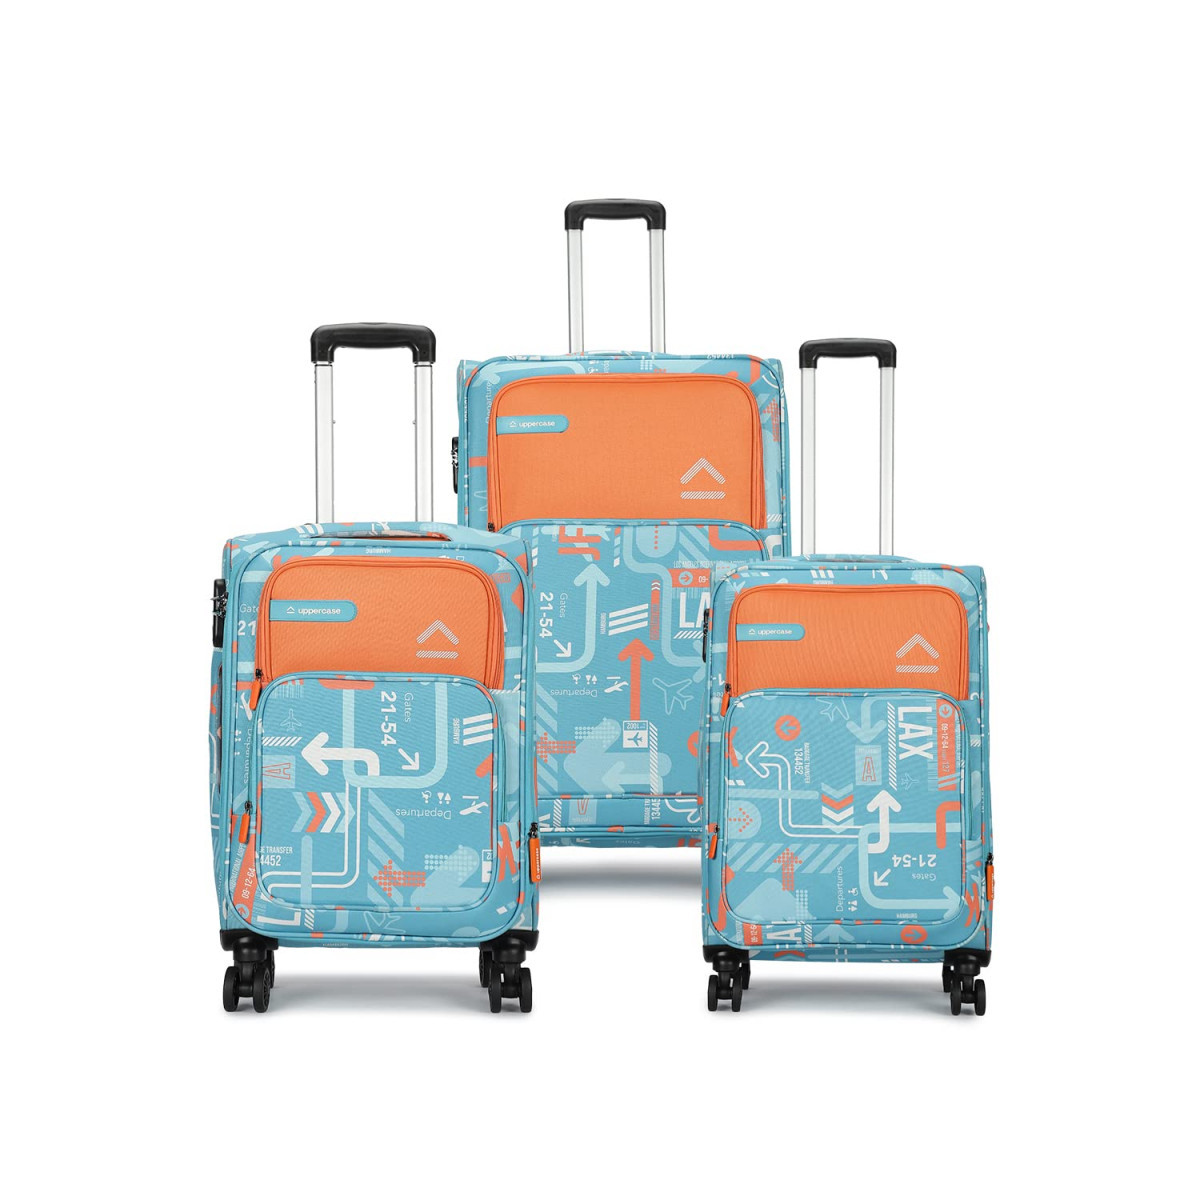 uppercase Jfk Trolley Bag Set Of 3 SML Polyester Eco-Soft Printed Luggage Cabin  Check-In Luggage Combination Lock 8 Wheel Suitcase For Unisex 2500 Days Warranty Teal Blue Spinner